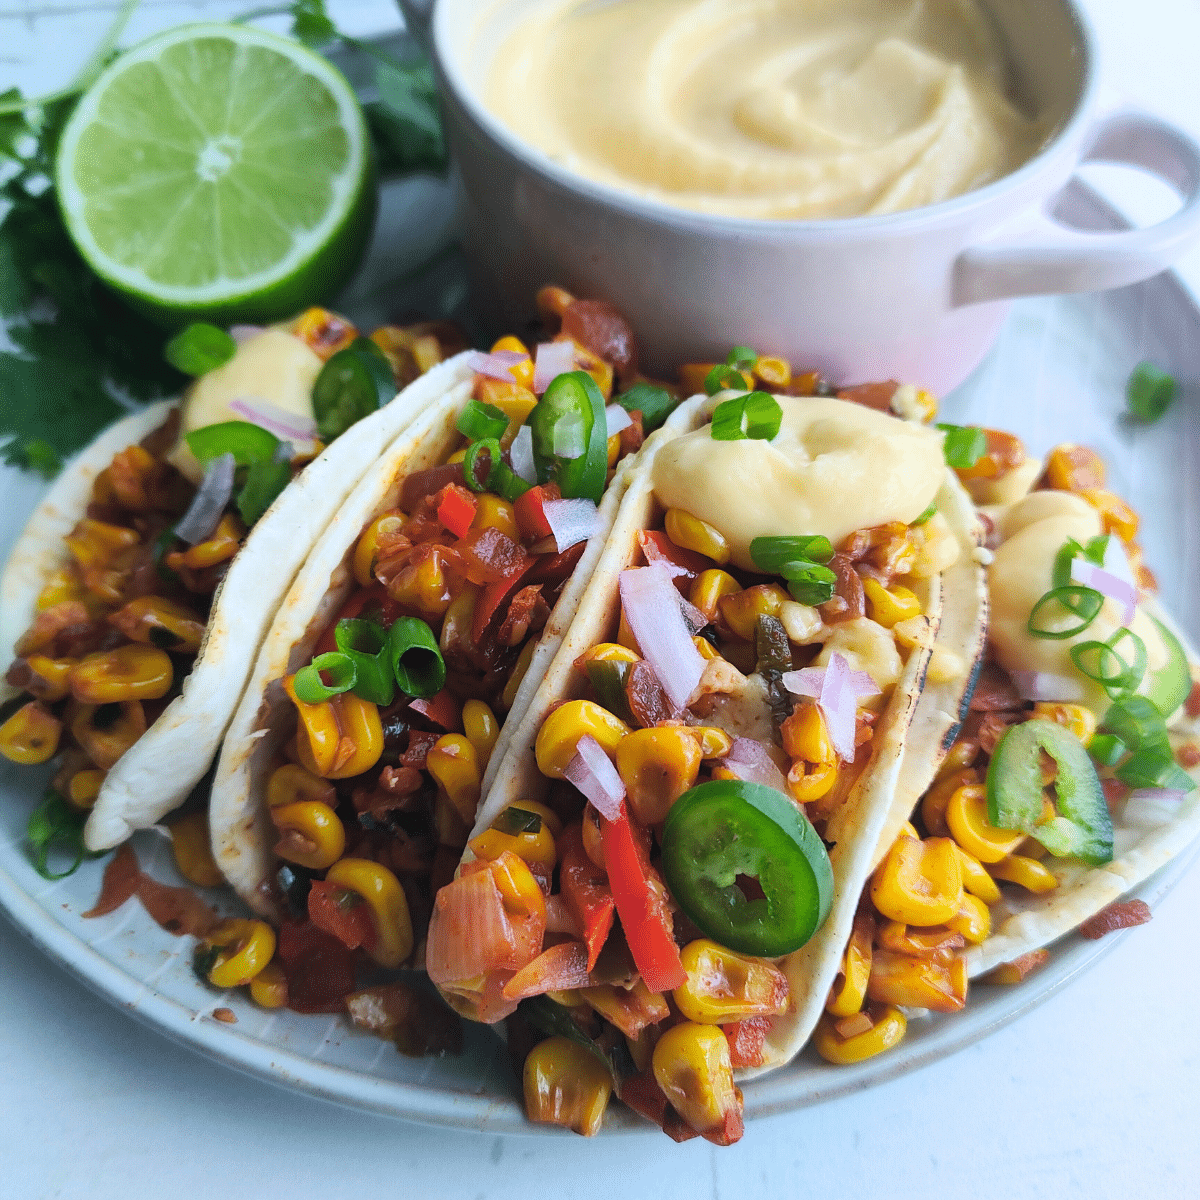 Spicy Corn and cheese tacos topped with cheese sauce